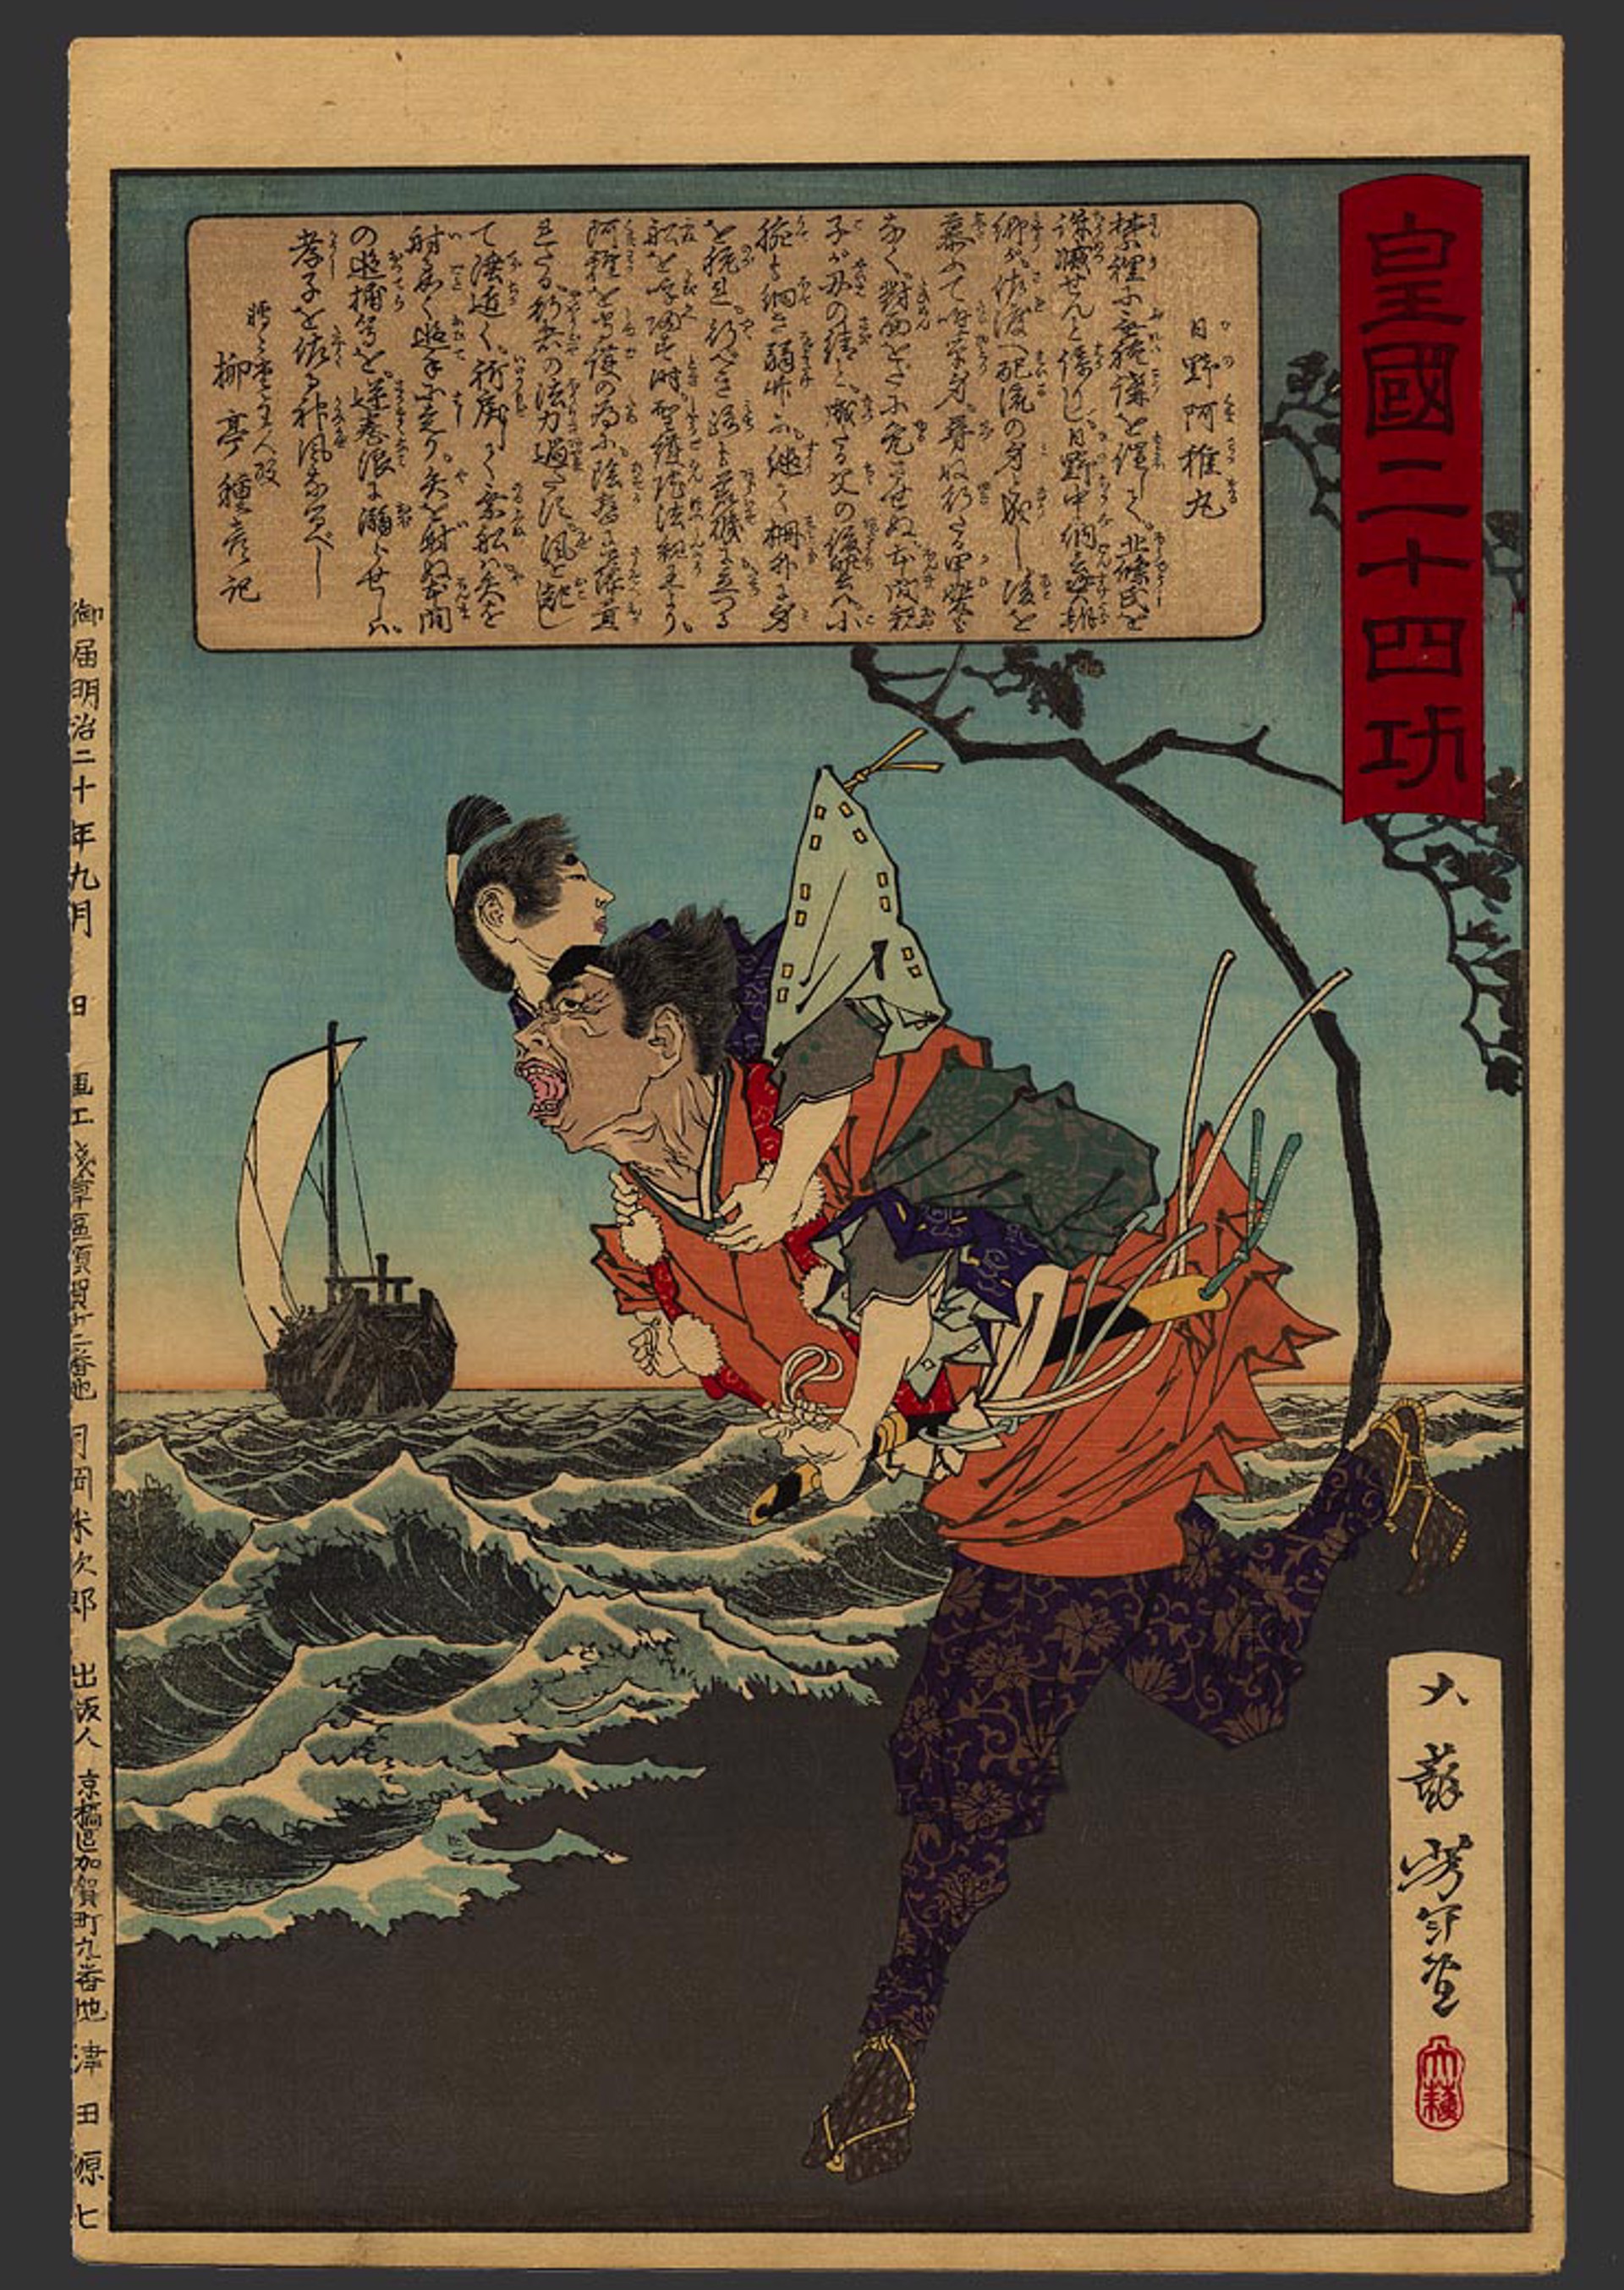 #19 A priest helps Hino Kumawakamaru escape from Sado Island after the death of his father Hino Sukutomo in 1332 24 Accomplishments in Imperial Japan by Yoshitoshi